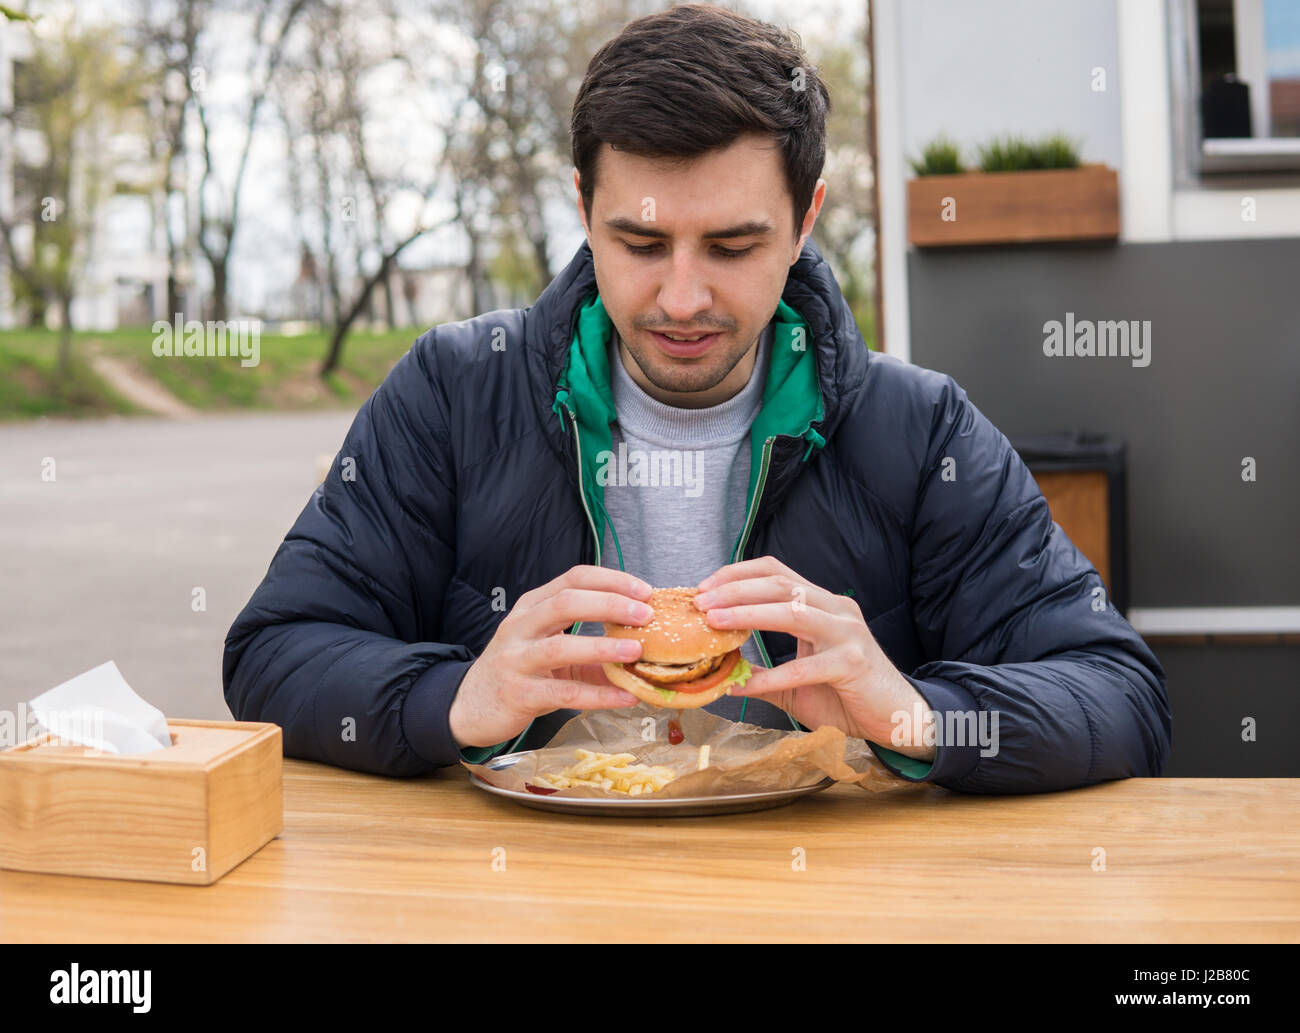 A portrait of young man in street food cafe Stock Photo